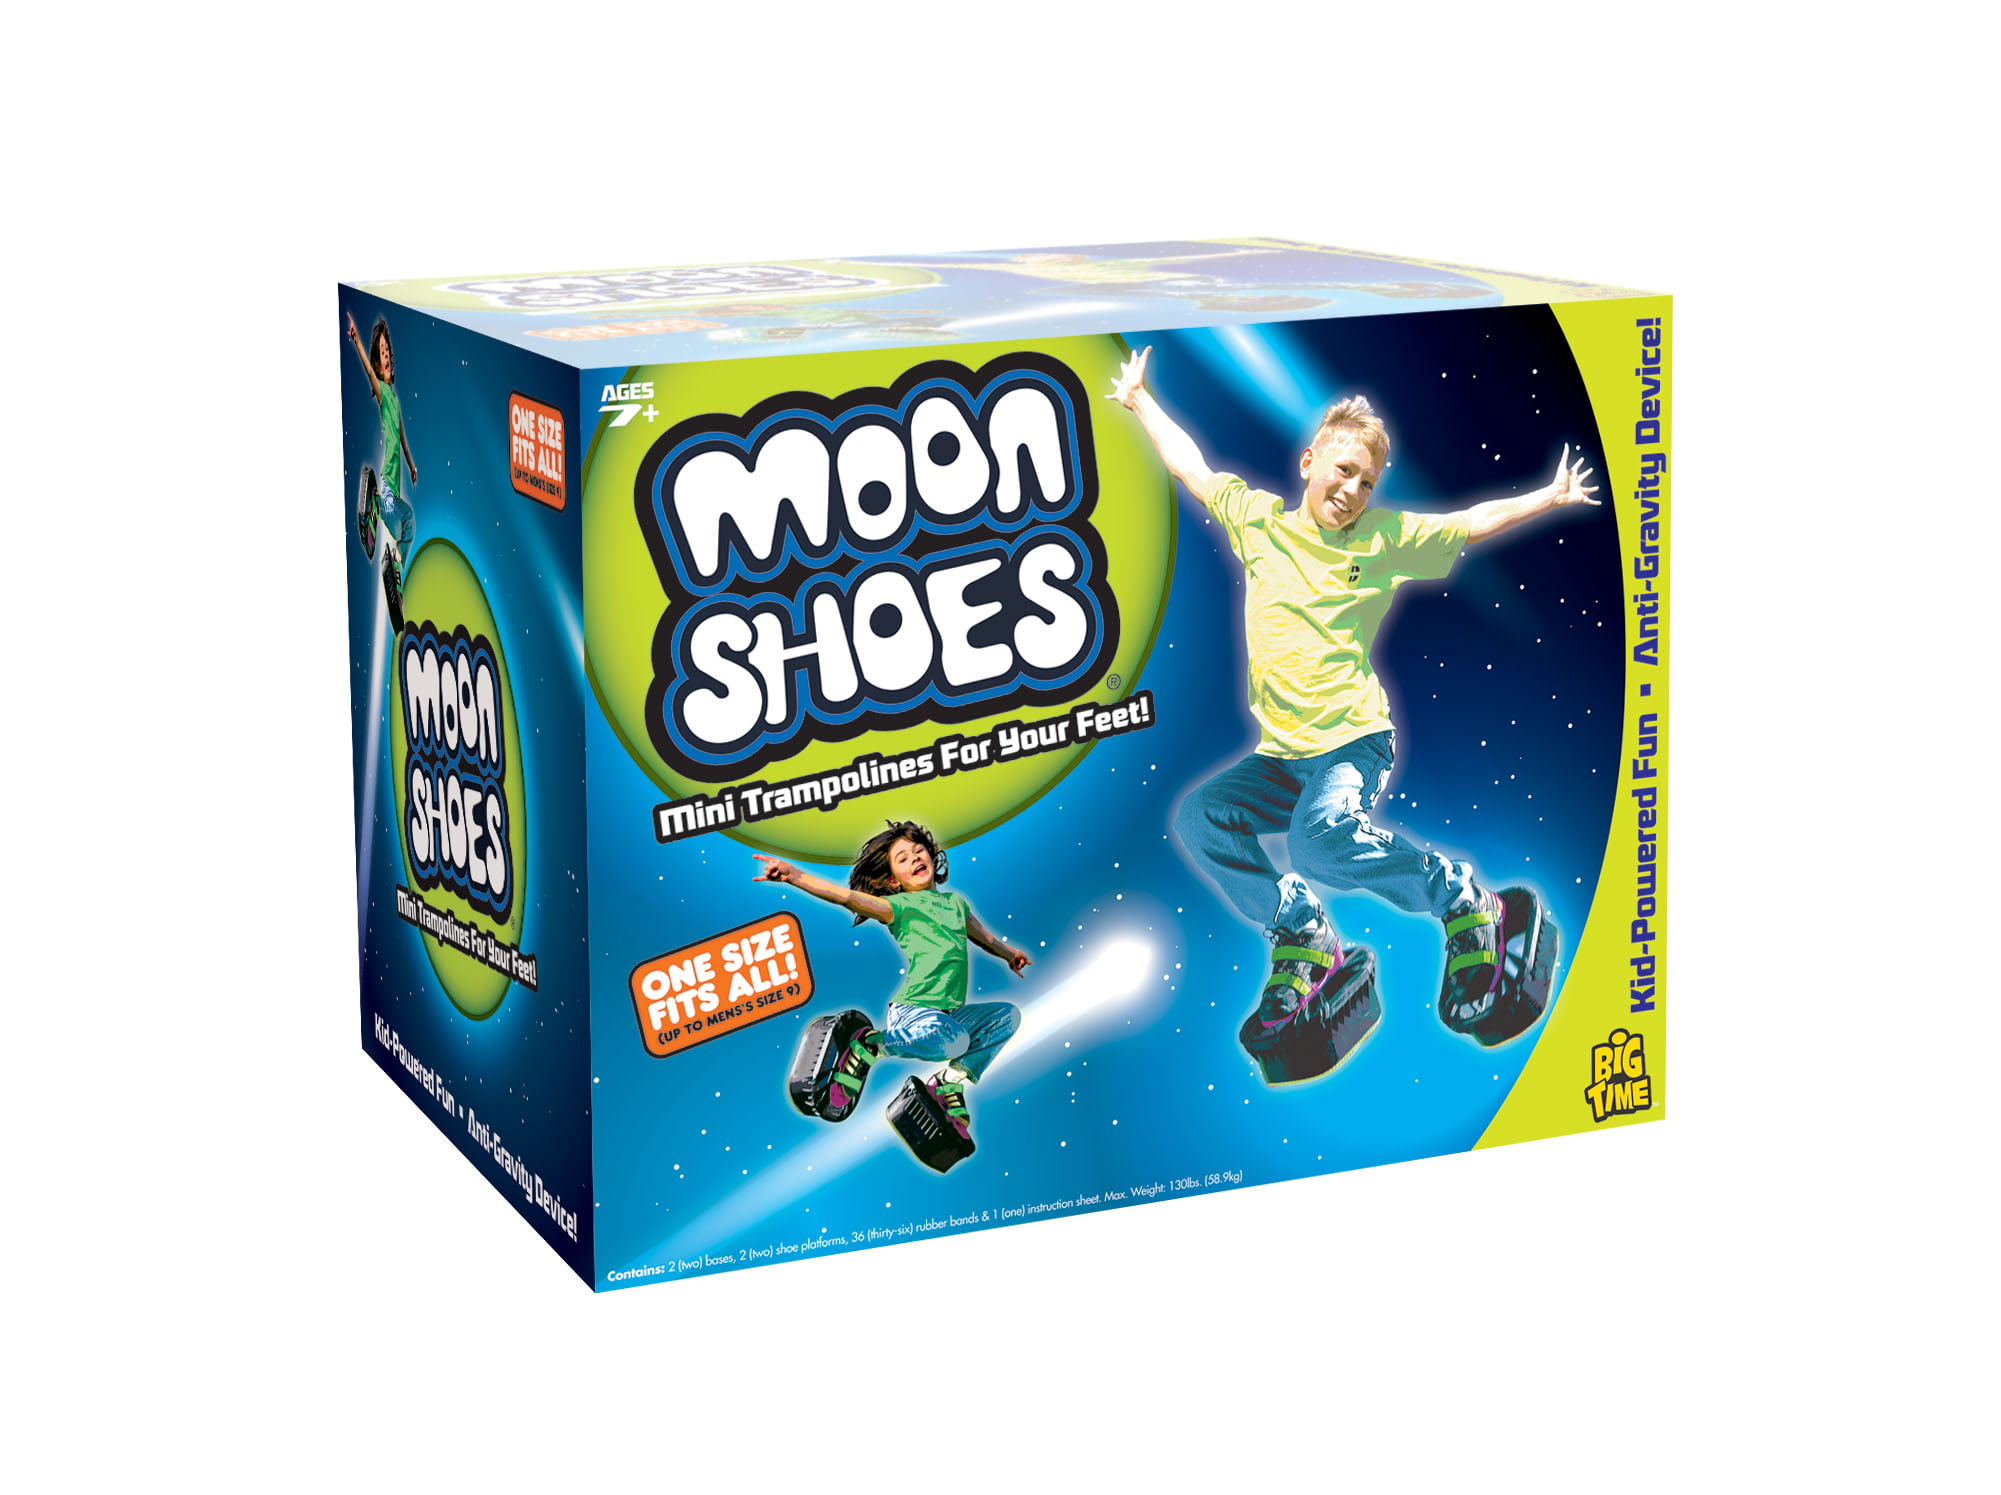 Mini Trampolines For Your Feet One Siz Big Time Toys Moon Shoes Bouncy Shoes 